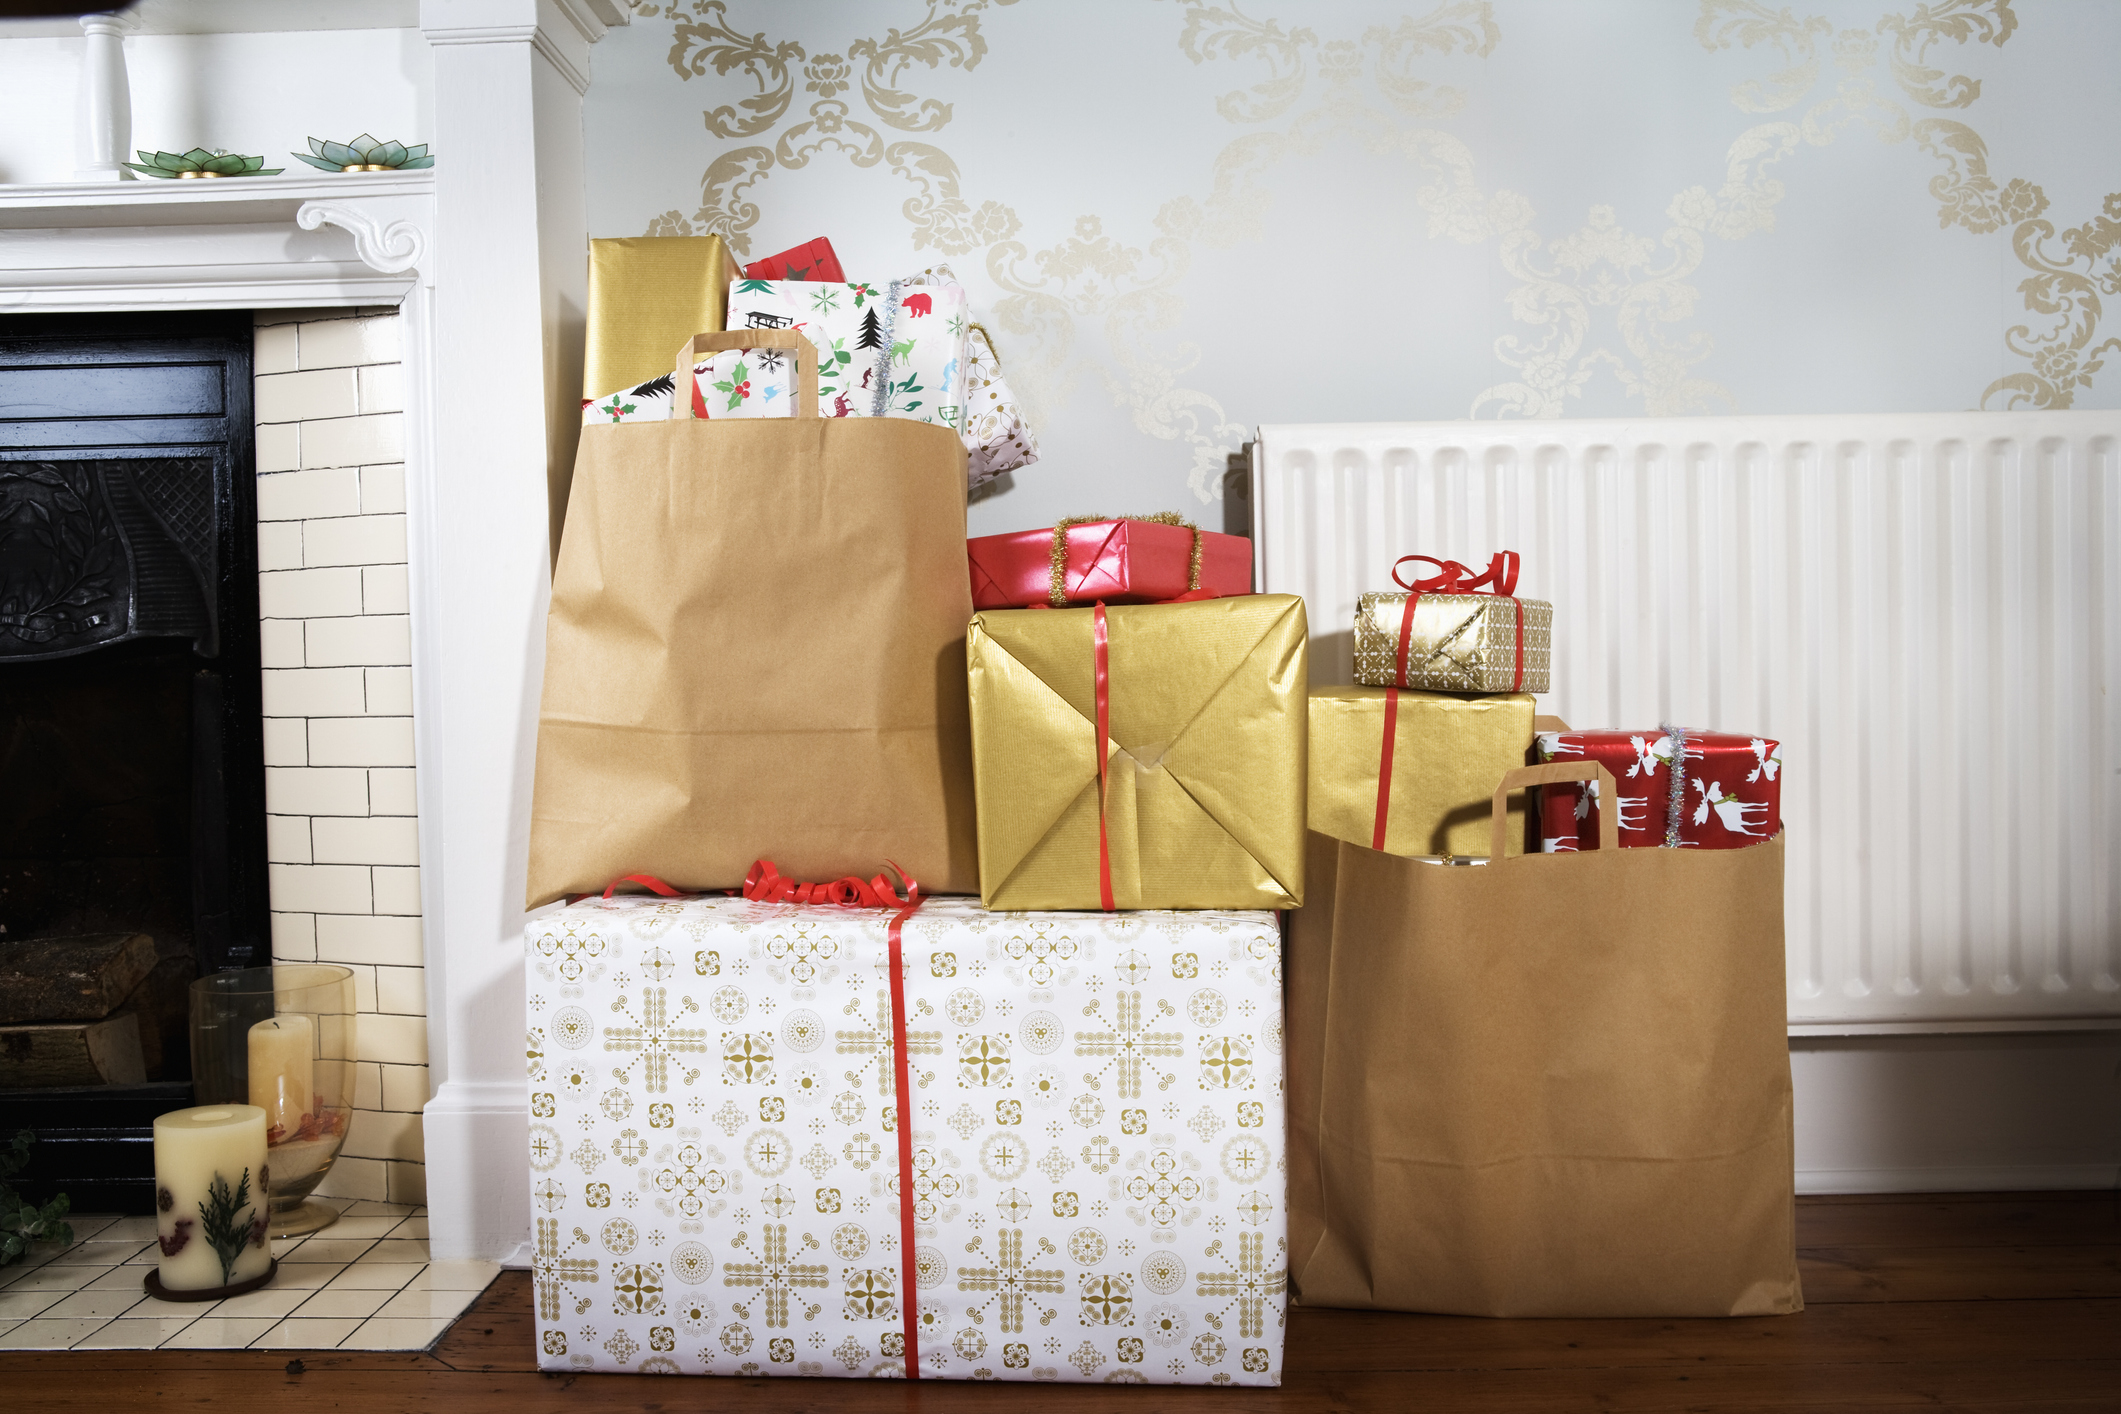 Presents in shopping bags in living room.